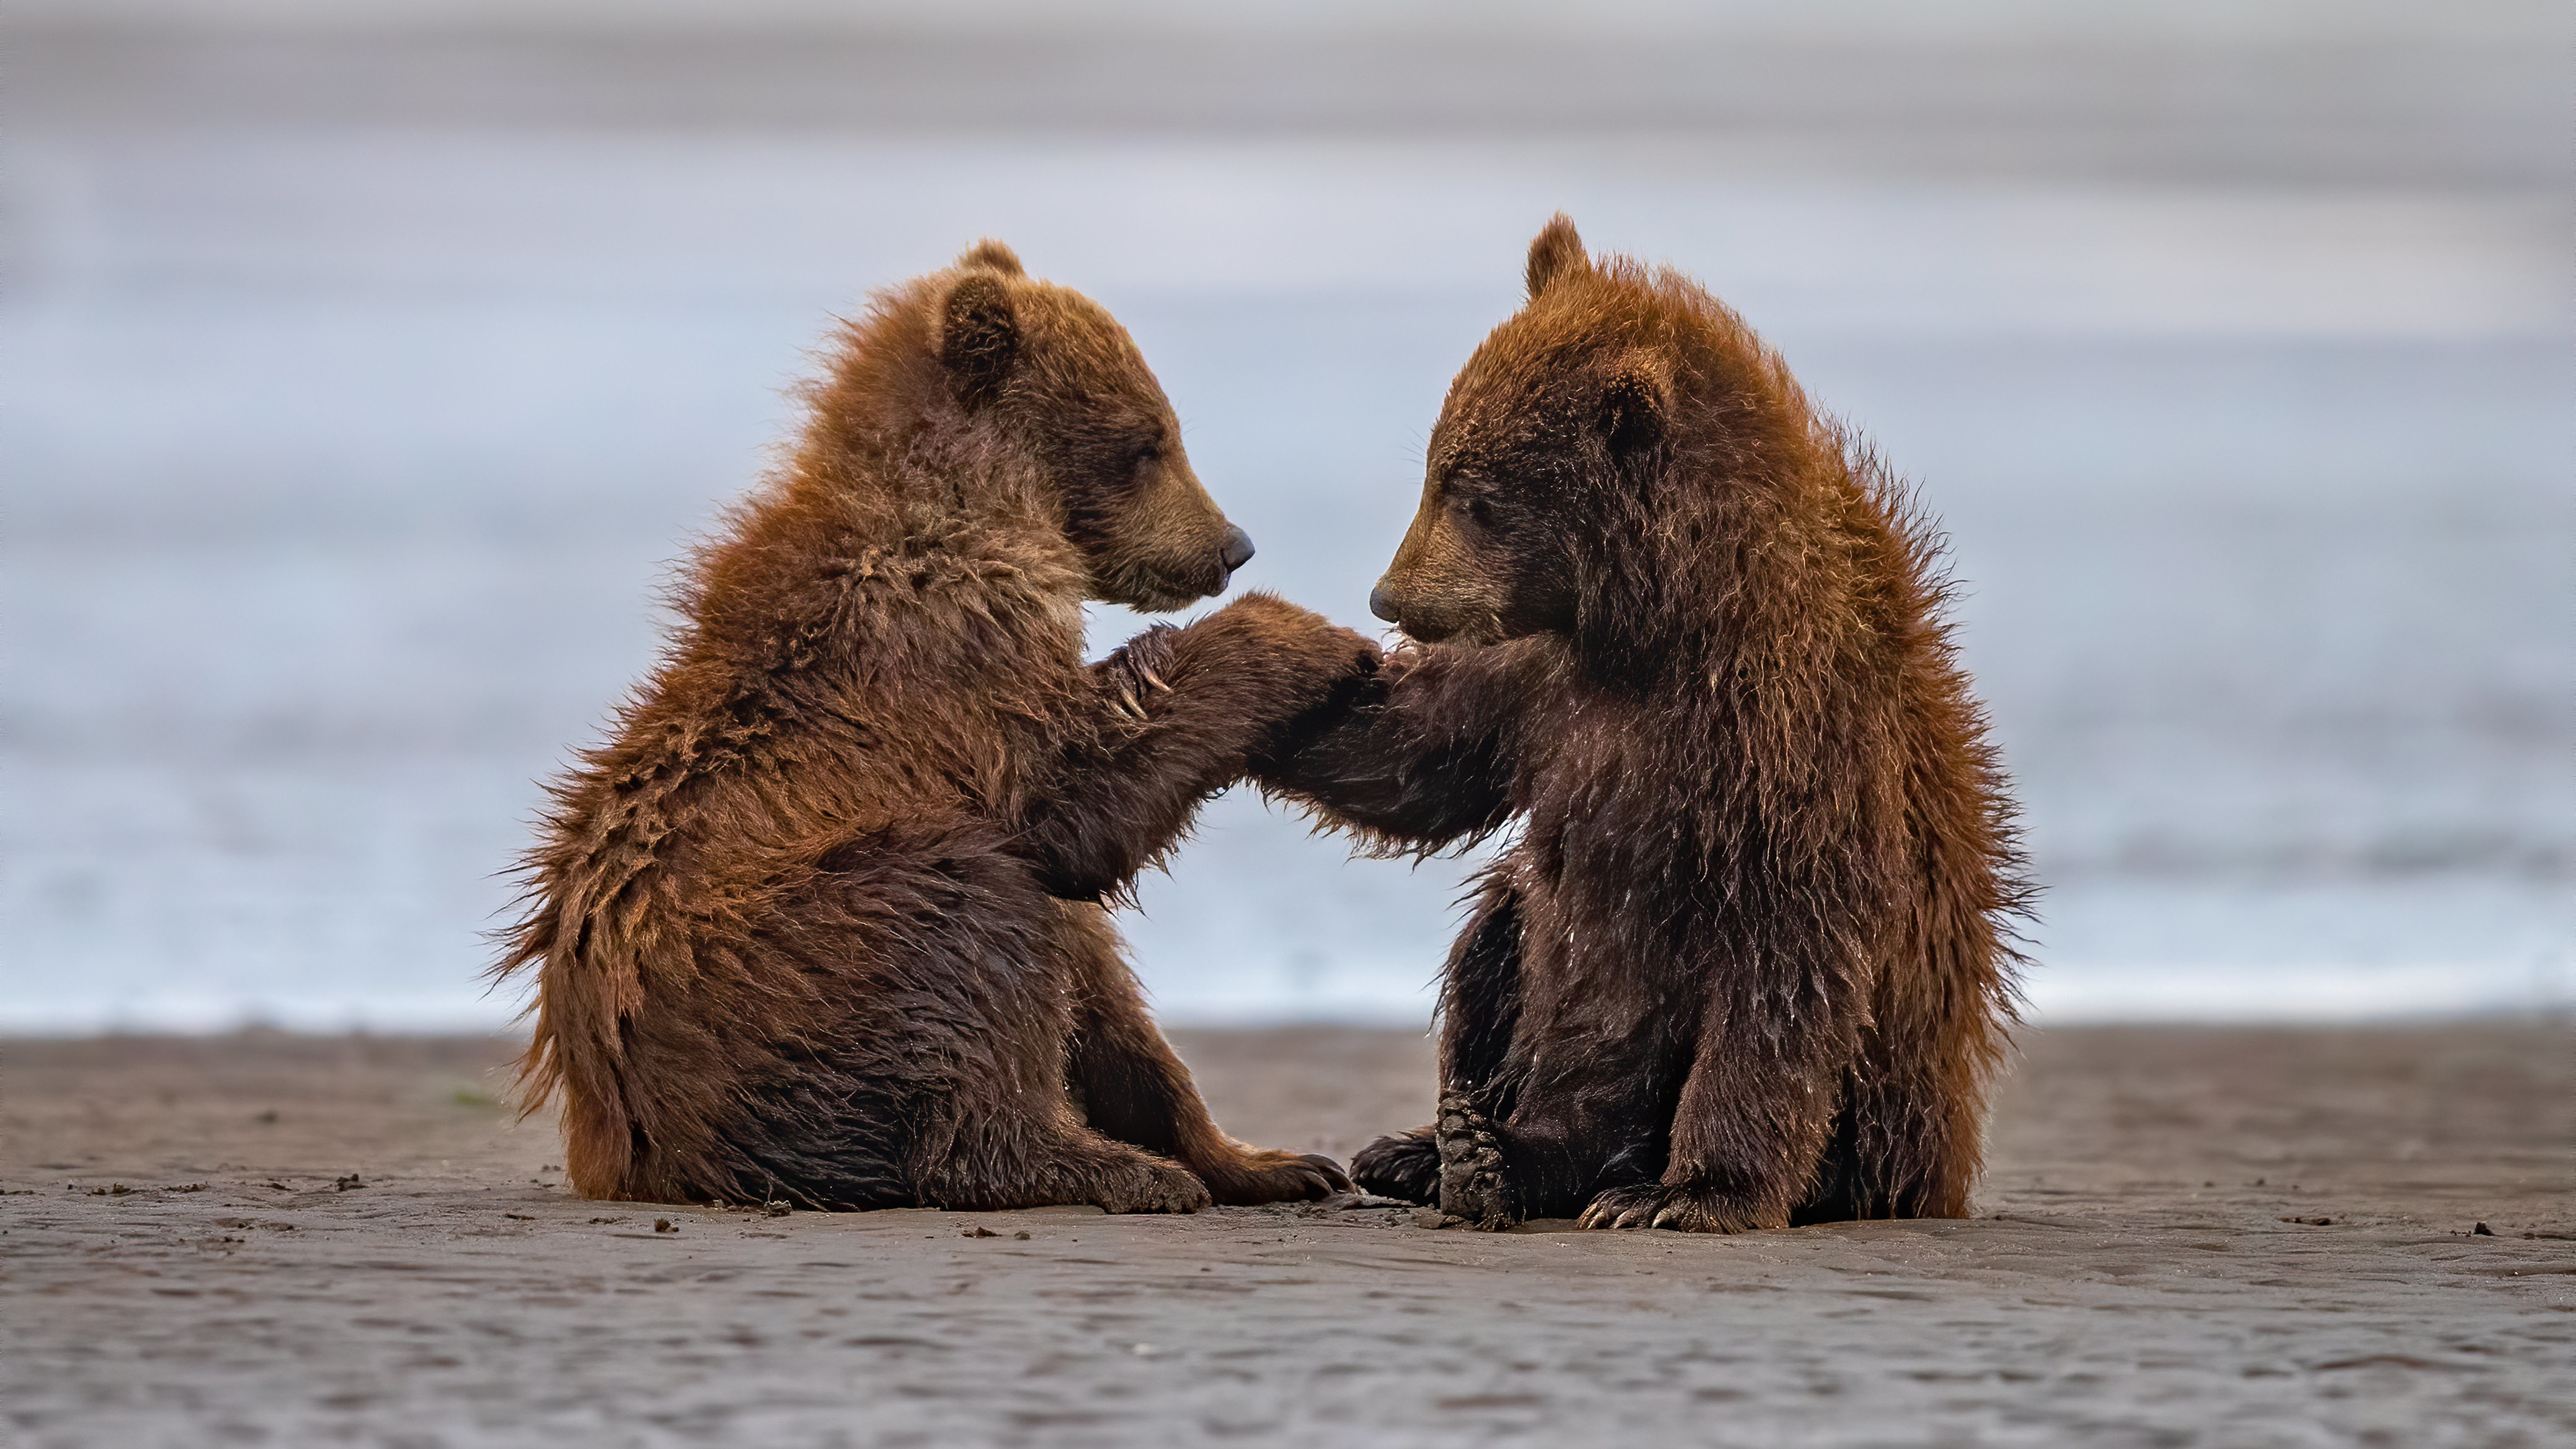 Two Baby Bears Are Sitting On Beach Sand With Water Background During Daytime 4K HD Animals Wallpapers